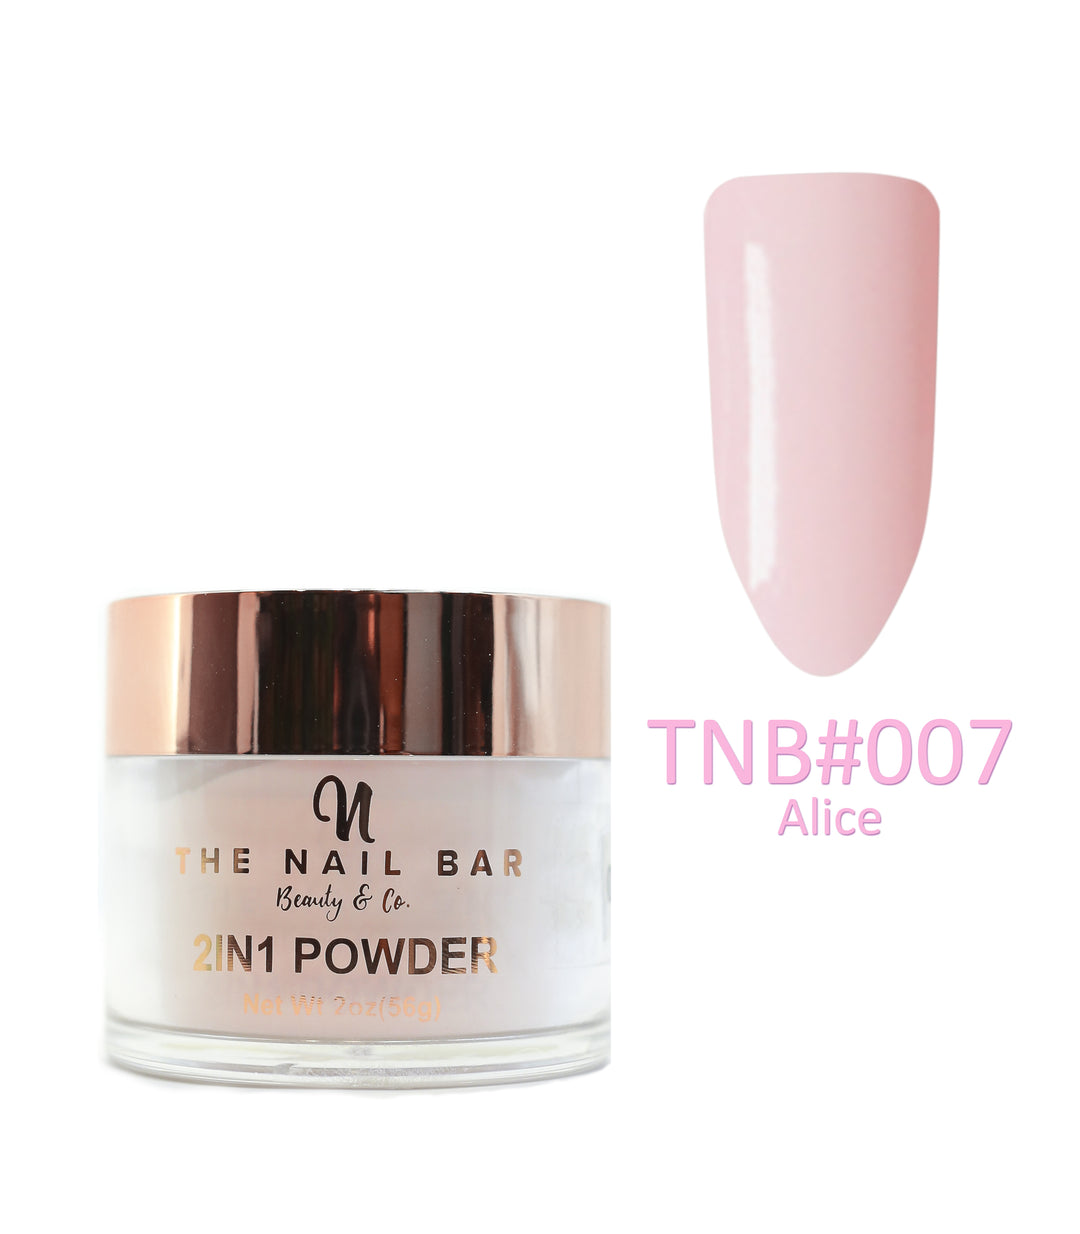 2-In-1 Dipping/Acrylic colour powder (2oz) -Alice - The Nail Bar Beauty & Co.